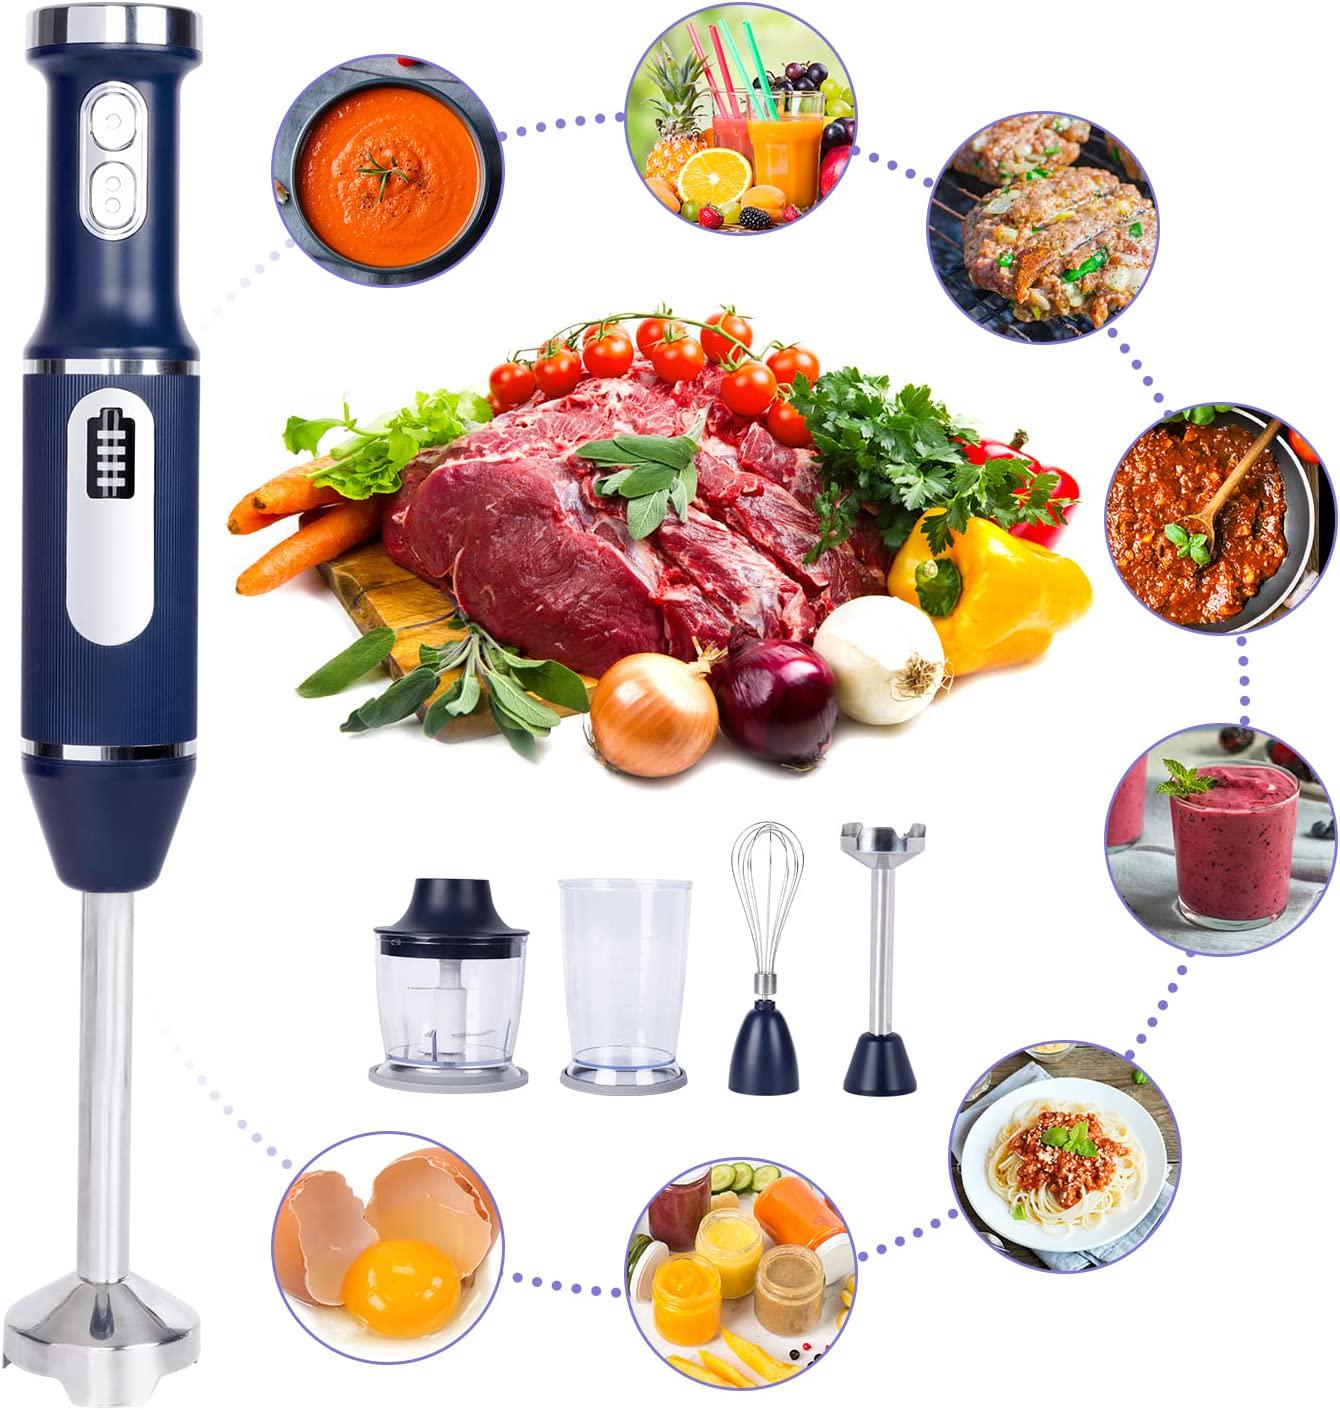 Fityou, Fityou 4-in-1 Immersion Hand Blender, Powerful 200W Rechargeable Handheld Stick Blender with Stainless Steel Blades, with Chopper, Beaker, Whisk for Smoothie, Baby Food, Sauces Red,Puree, Soup (Blue)